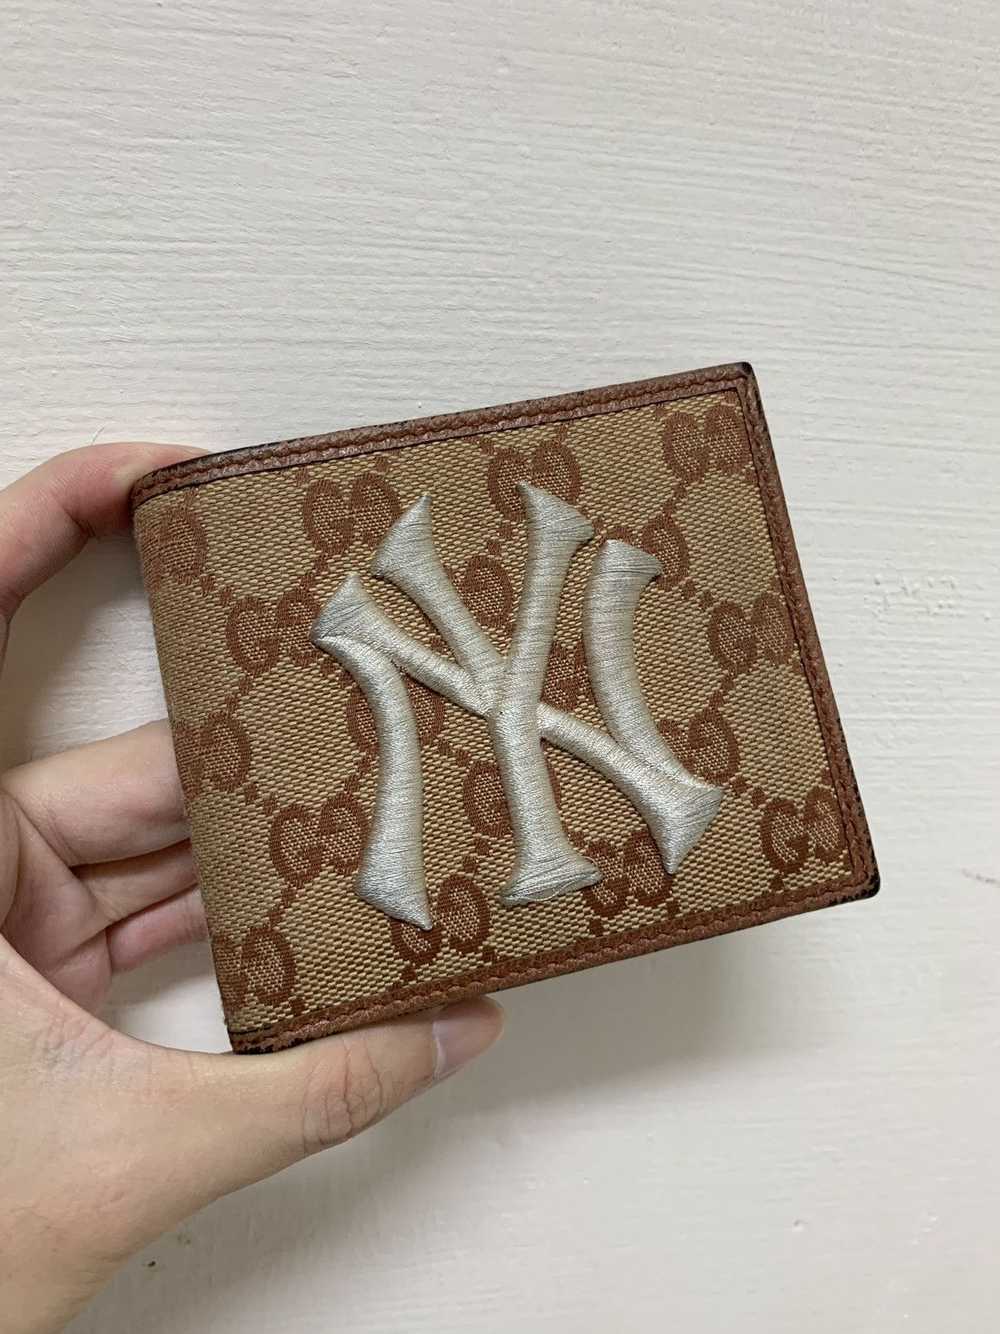 Gucci Gucci New York Yankees Patch Wallet - image 2